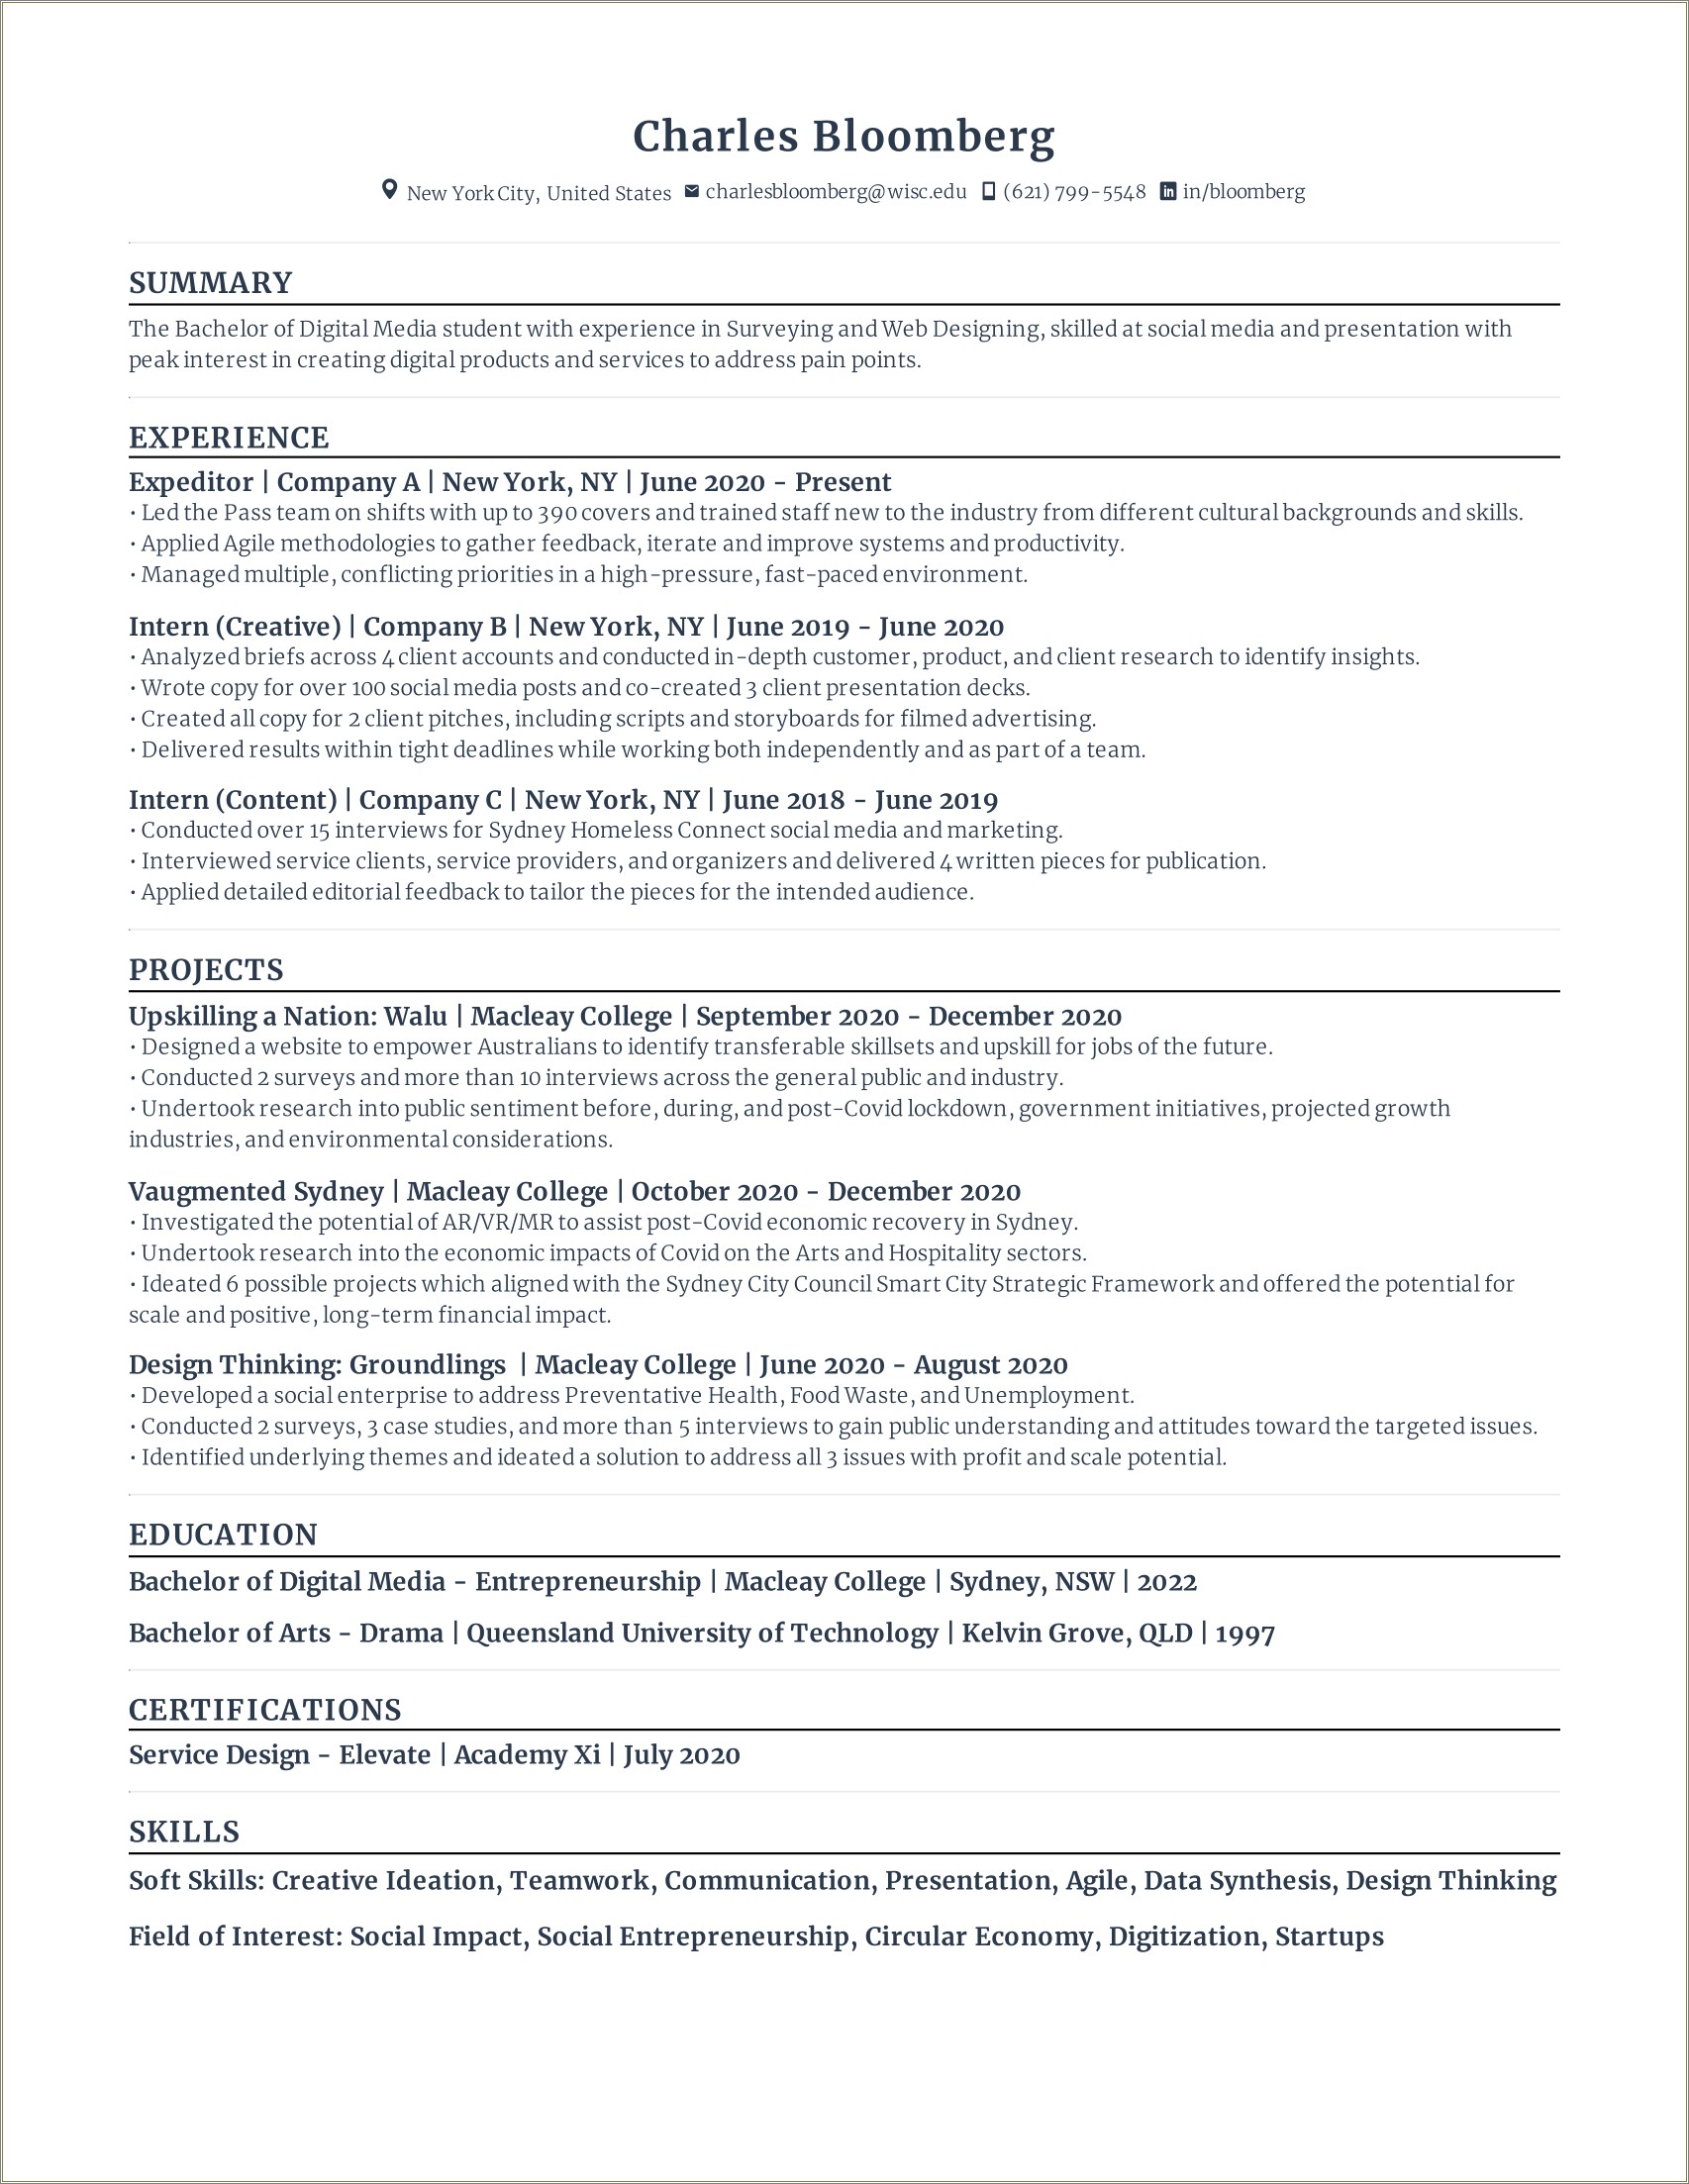 Environmental Service General Manager Example Resume